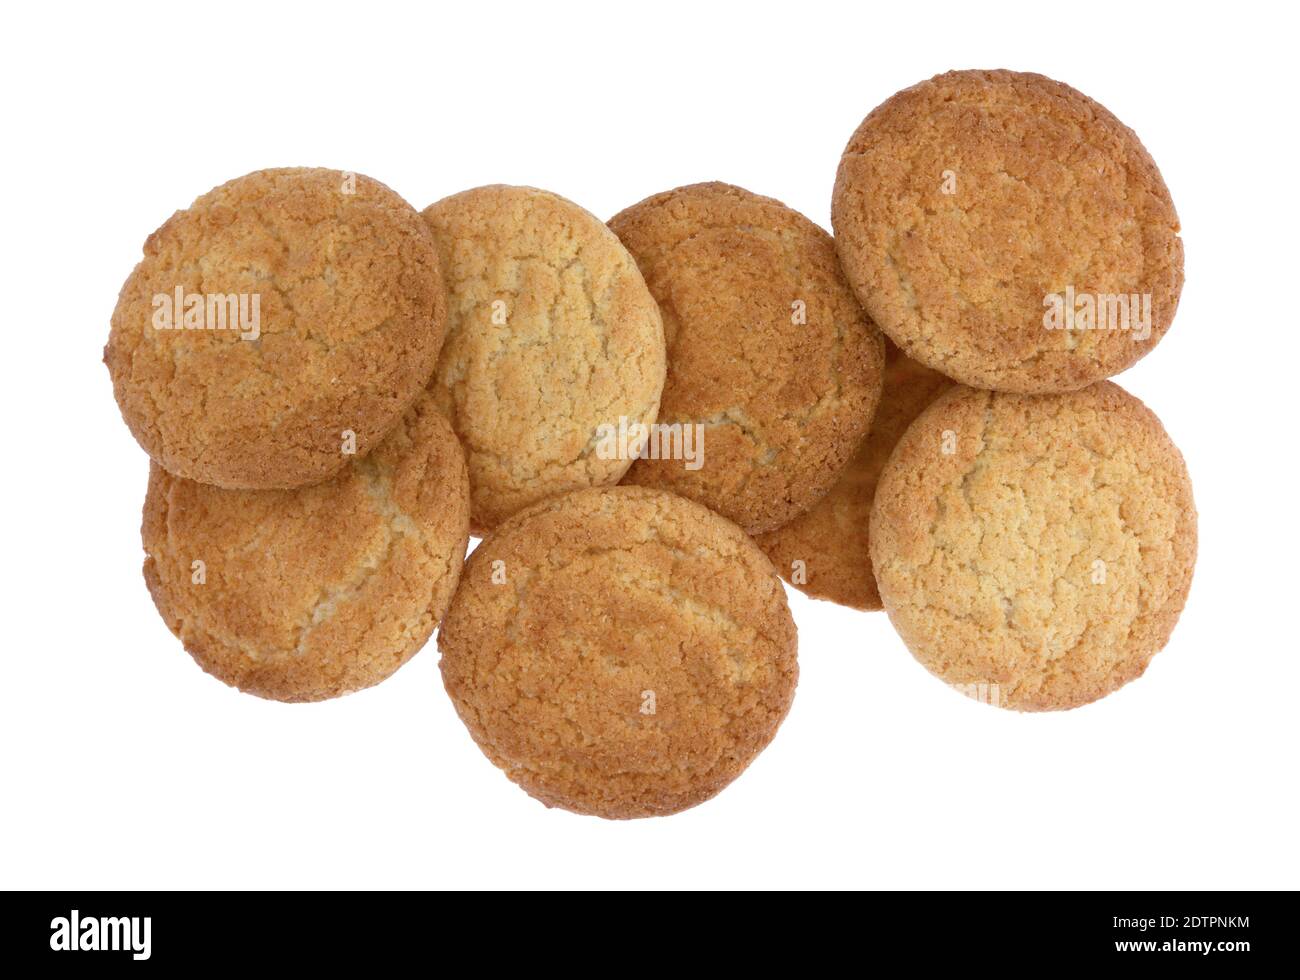 Top view of a group of coconut flavor cookies isolated on a white background. Stock Photo